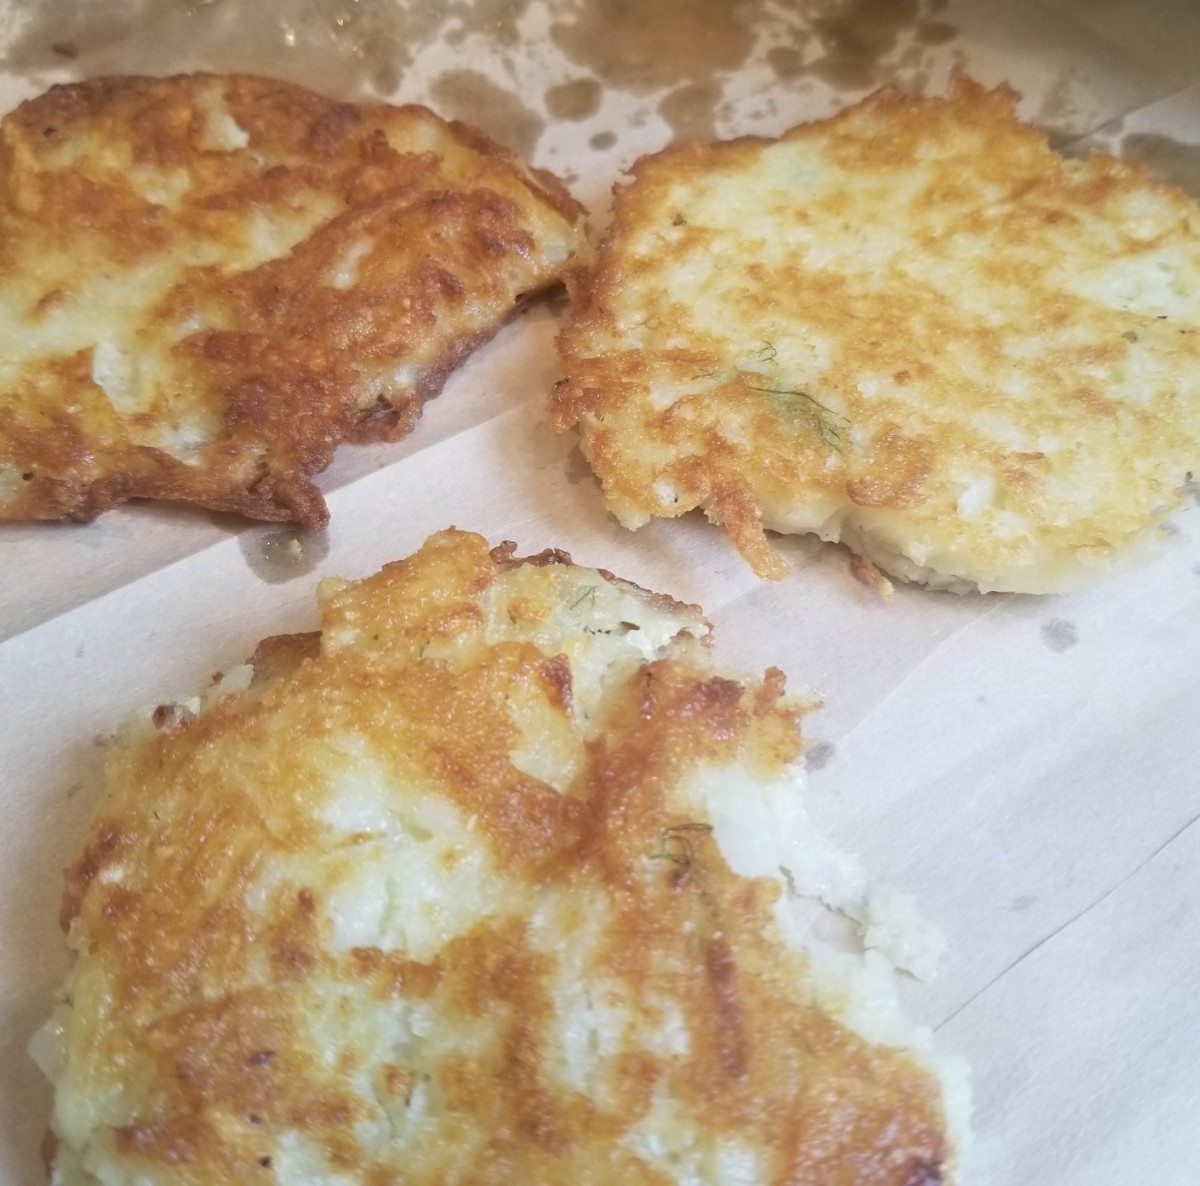 Remove excess grease by letting the potato pancakes drain on a paper towel or paper bag.